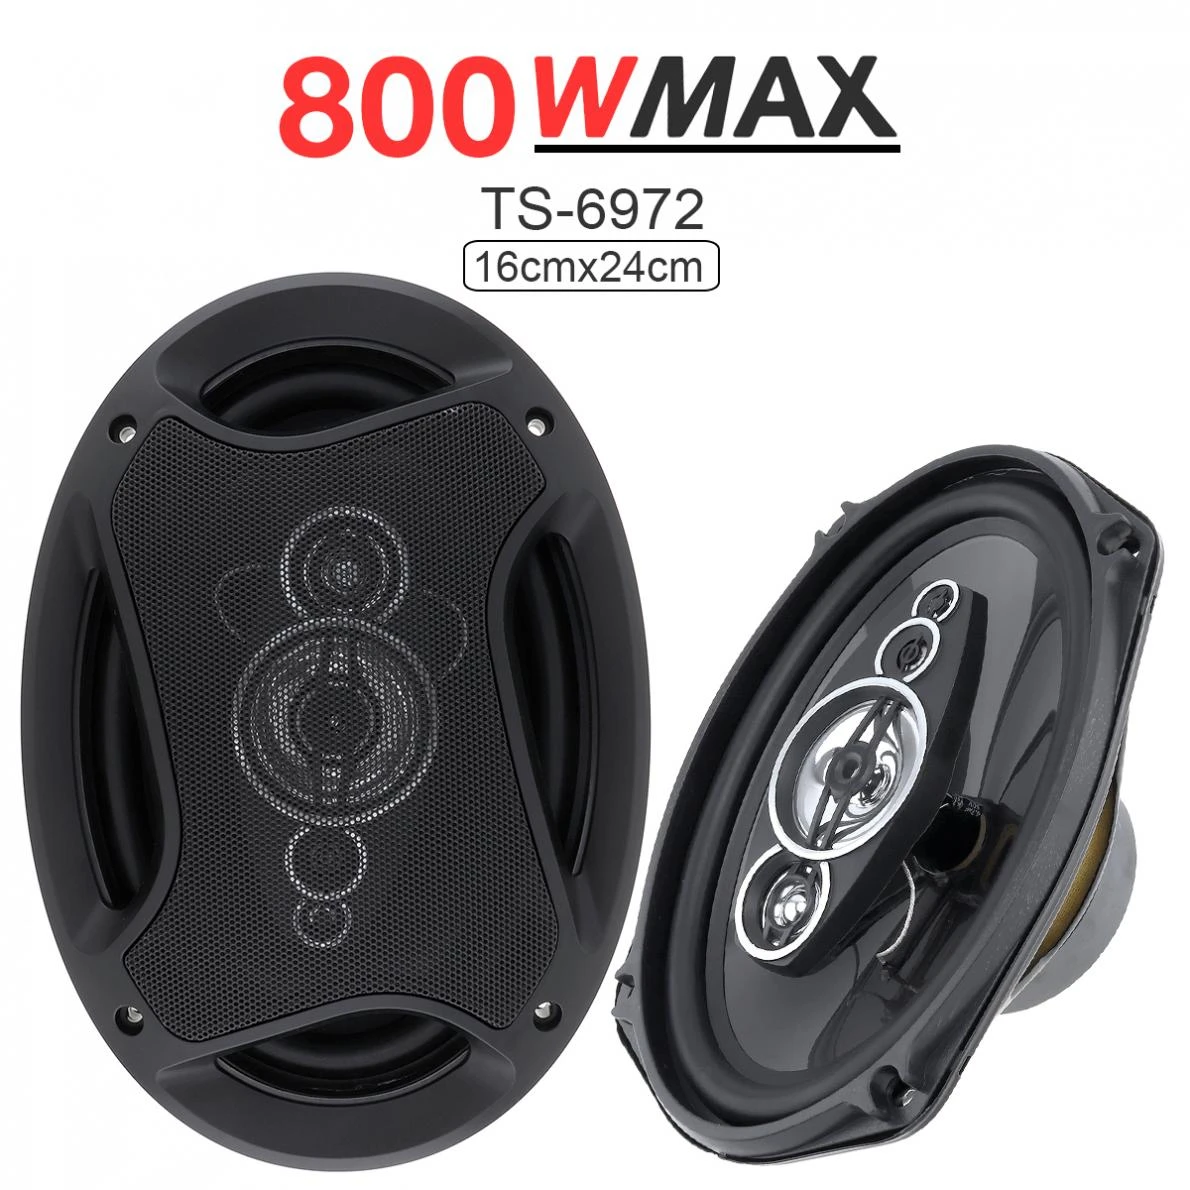 2pcs 6x9" 800W Car Coaxial Auto Audio Music Stereo Full Range Frequency  Hifi Speakers Non destructive Installation|Coaxial speakers| - AliExpress